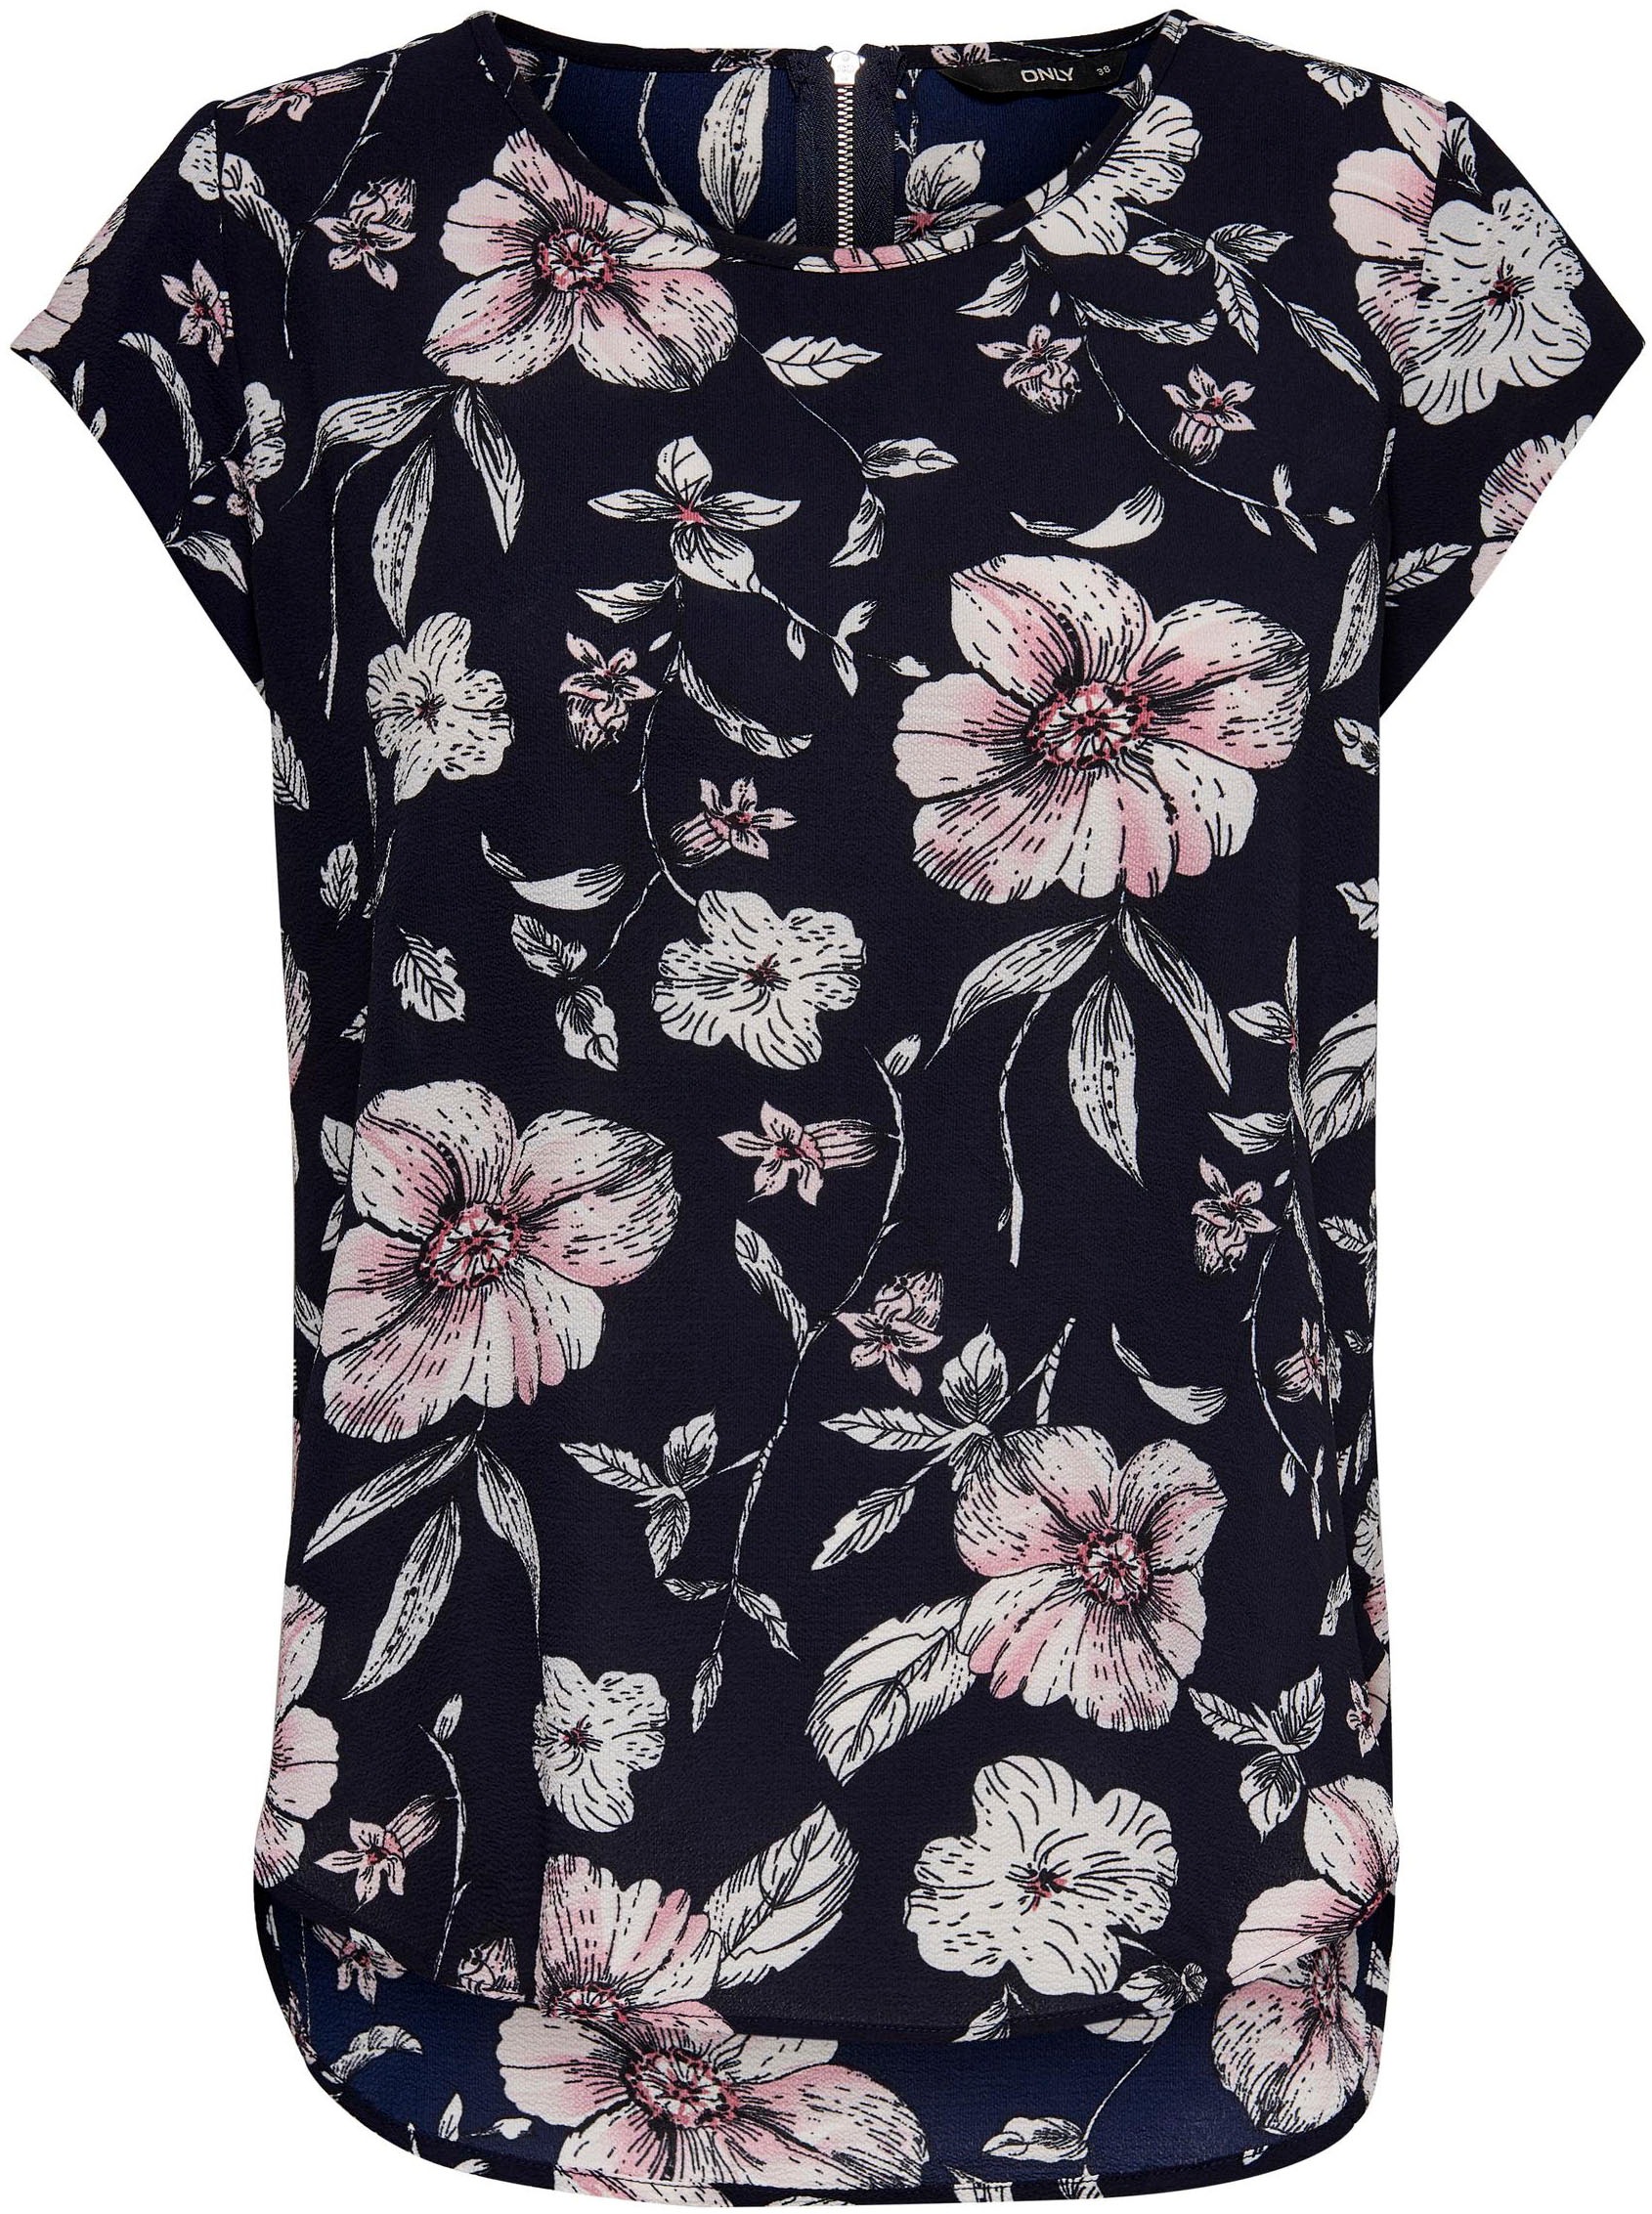 AOP PTM«, Print »ONLVIC Shirtbluse bei ONLY mit TOP NOOS S/S ♕